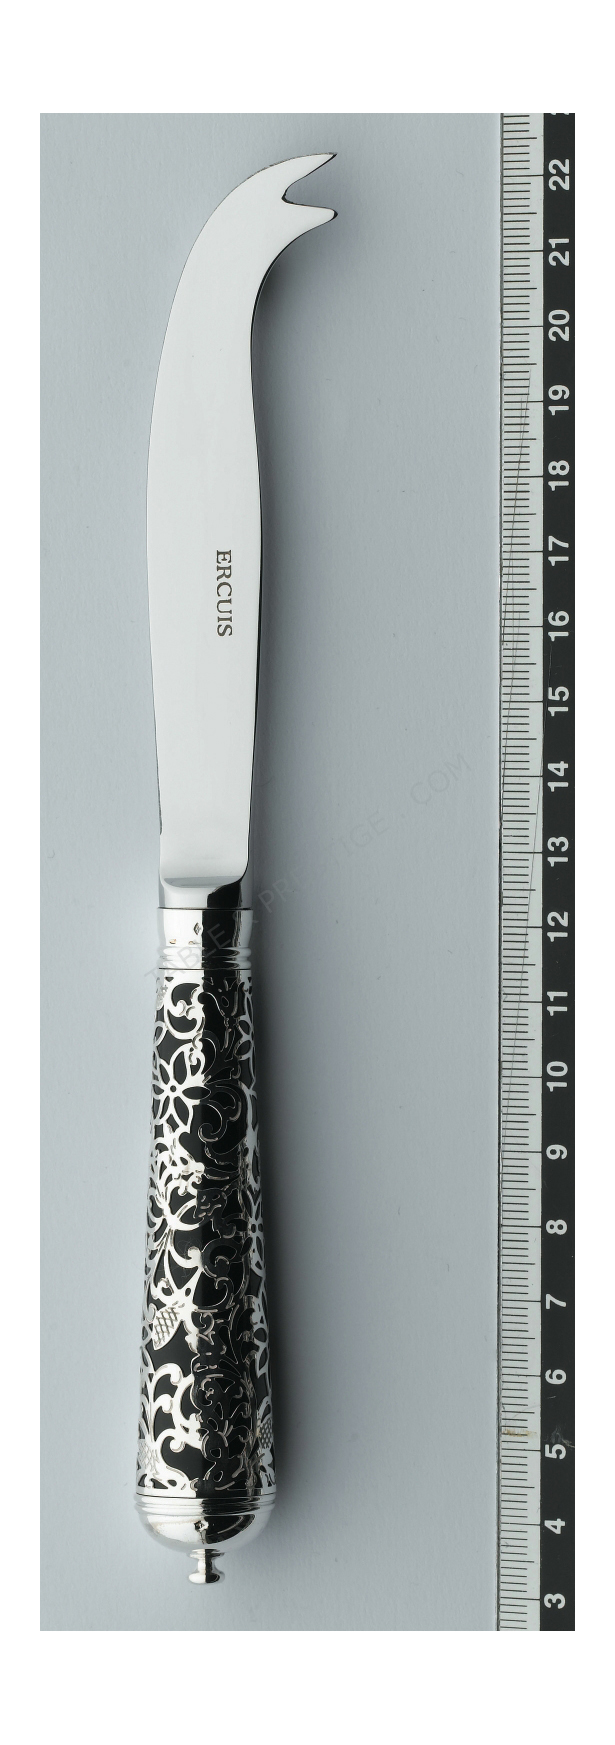 Cheese knife 2 prongs in sterling silver - Ercuis